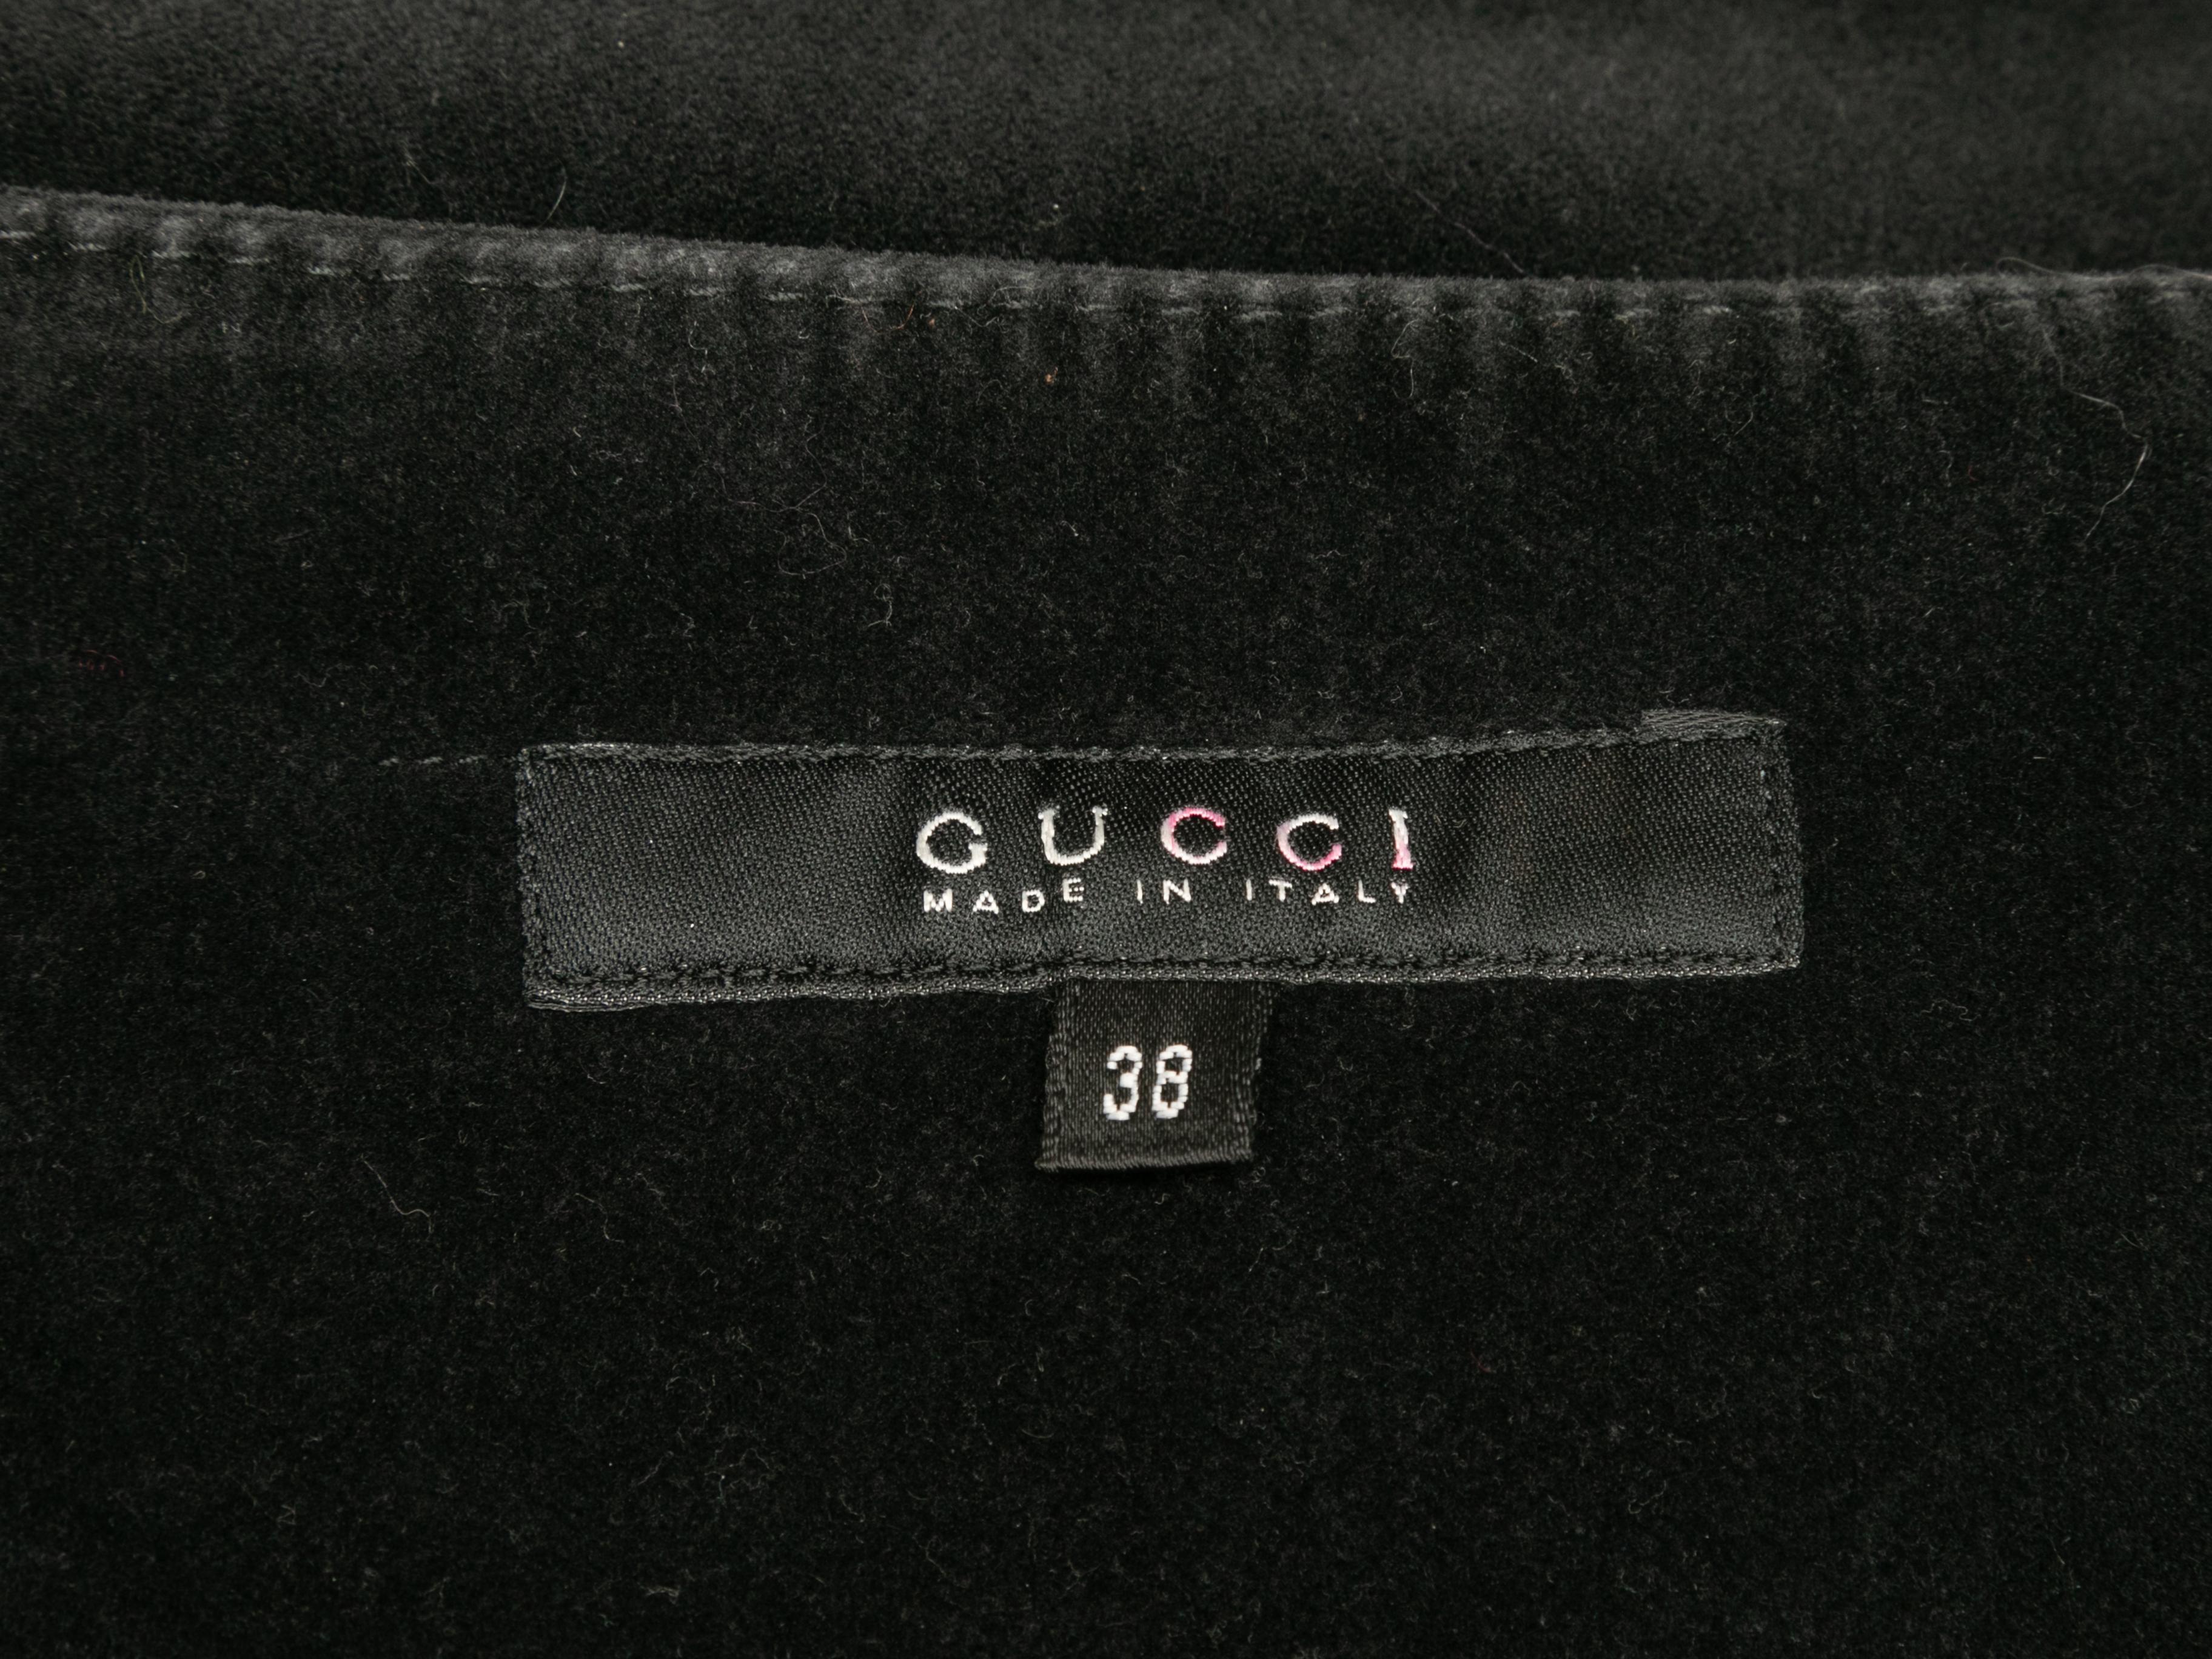 Vintage black velvet skinny pants by Gucci. From the Fall/Winter 2002 Tom Ford Era Collection. Side closure. 31